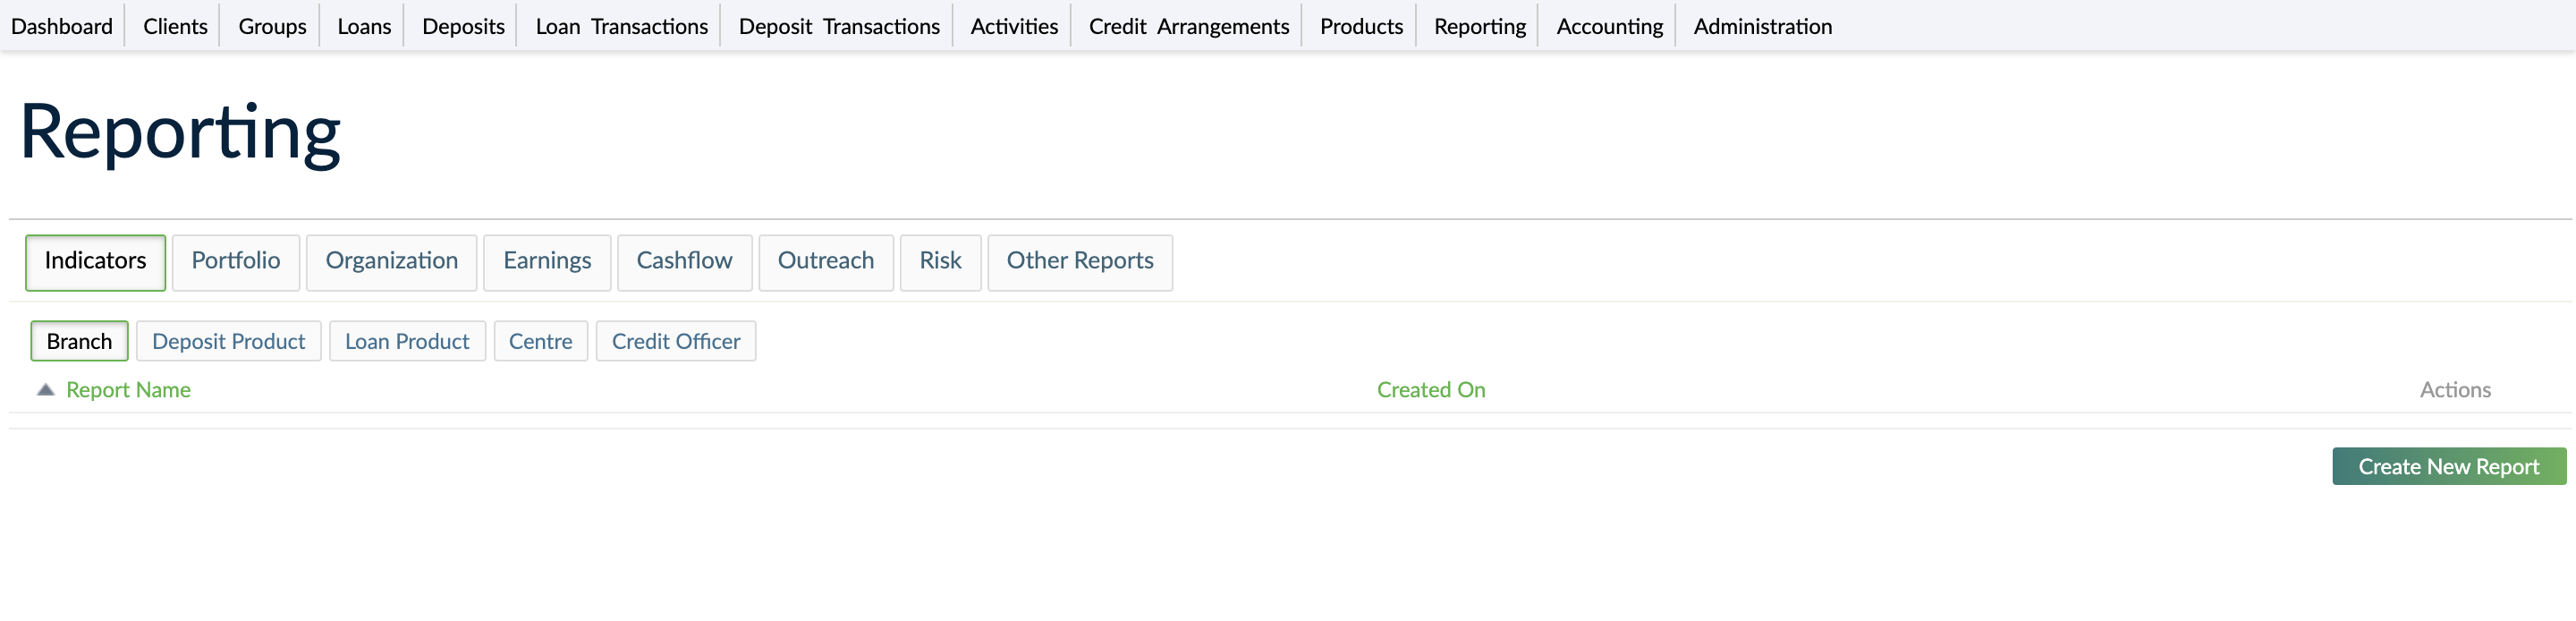 The management reports available under the Reporting menu item